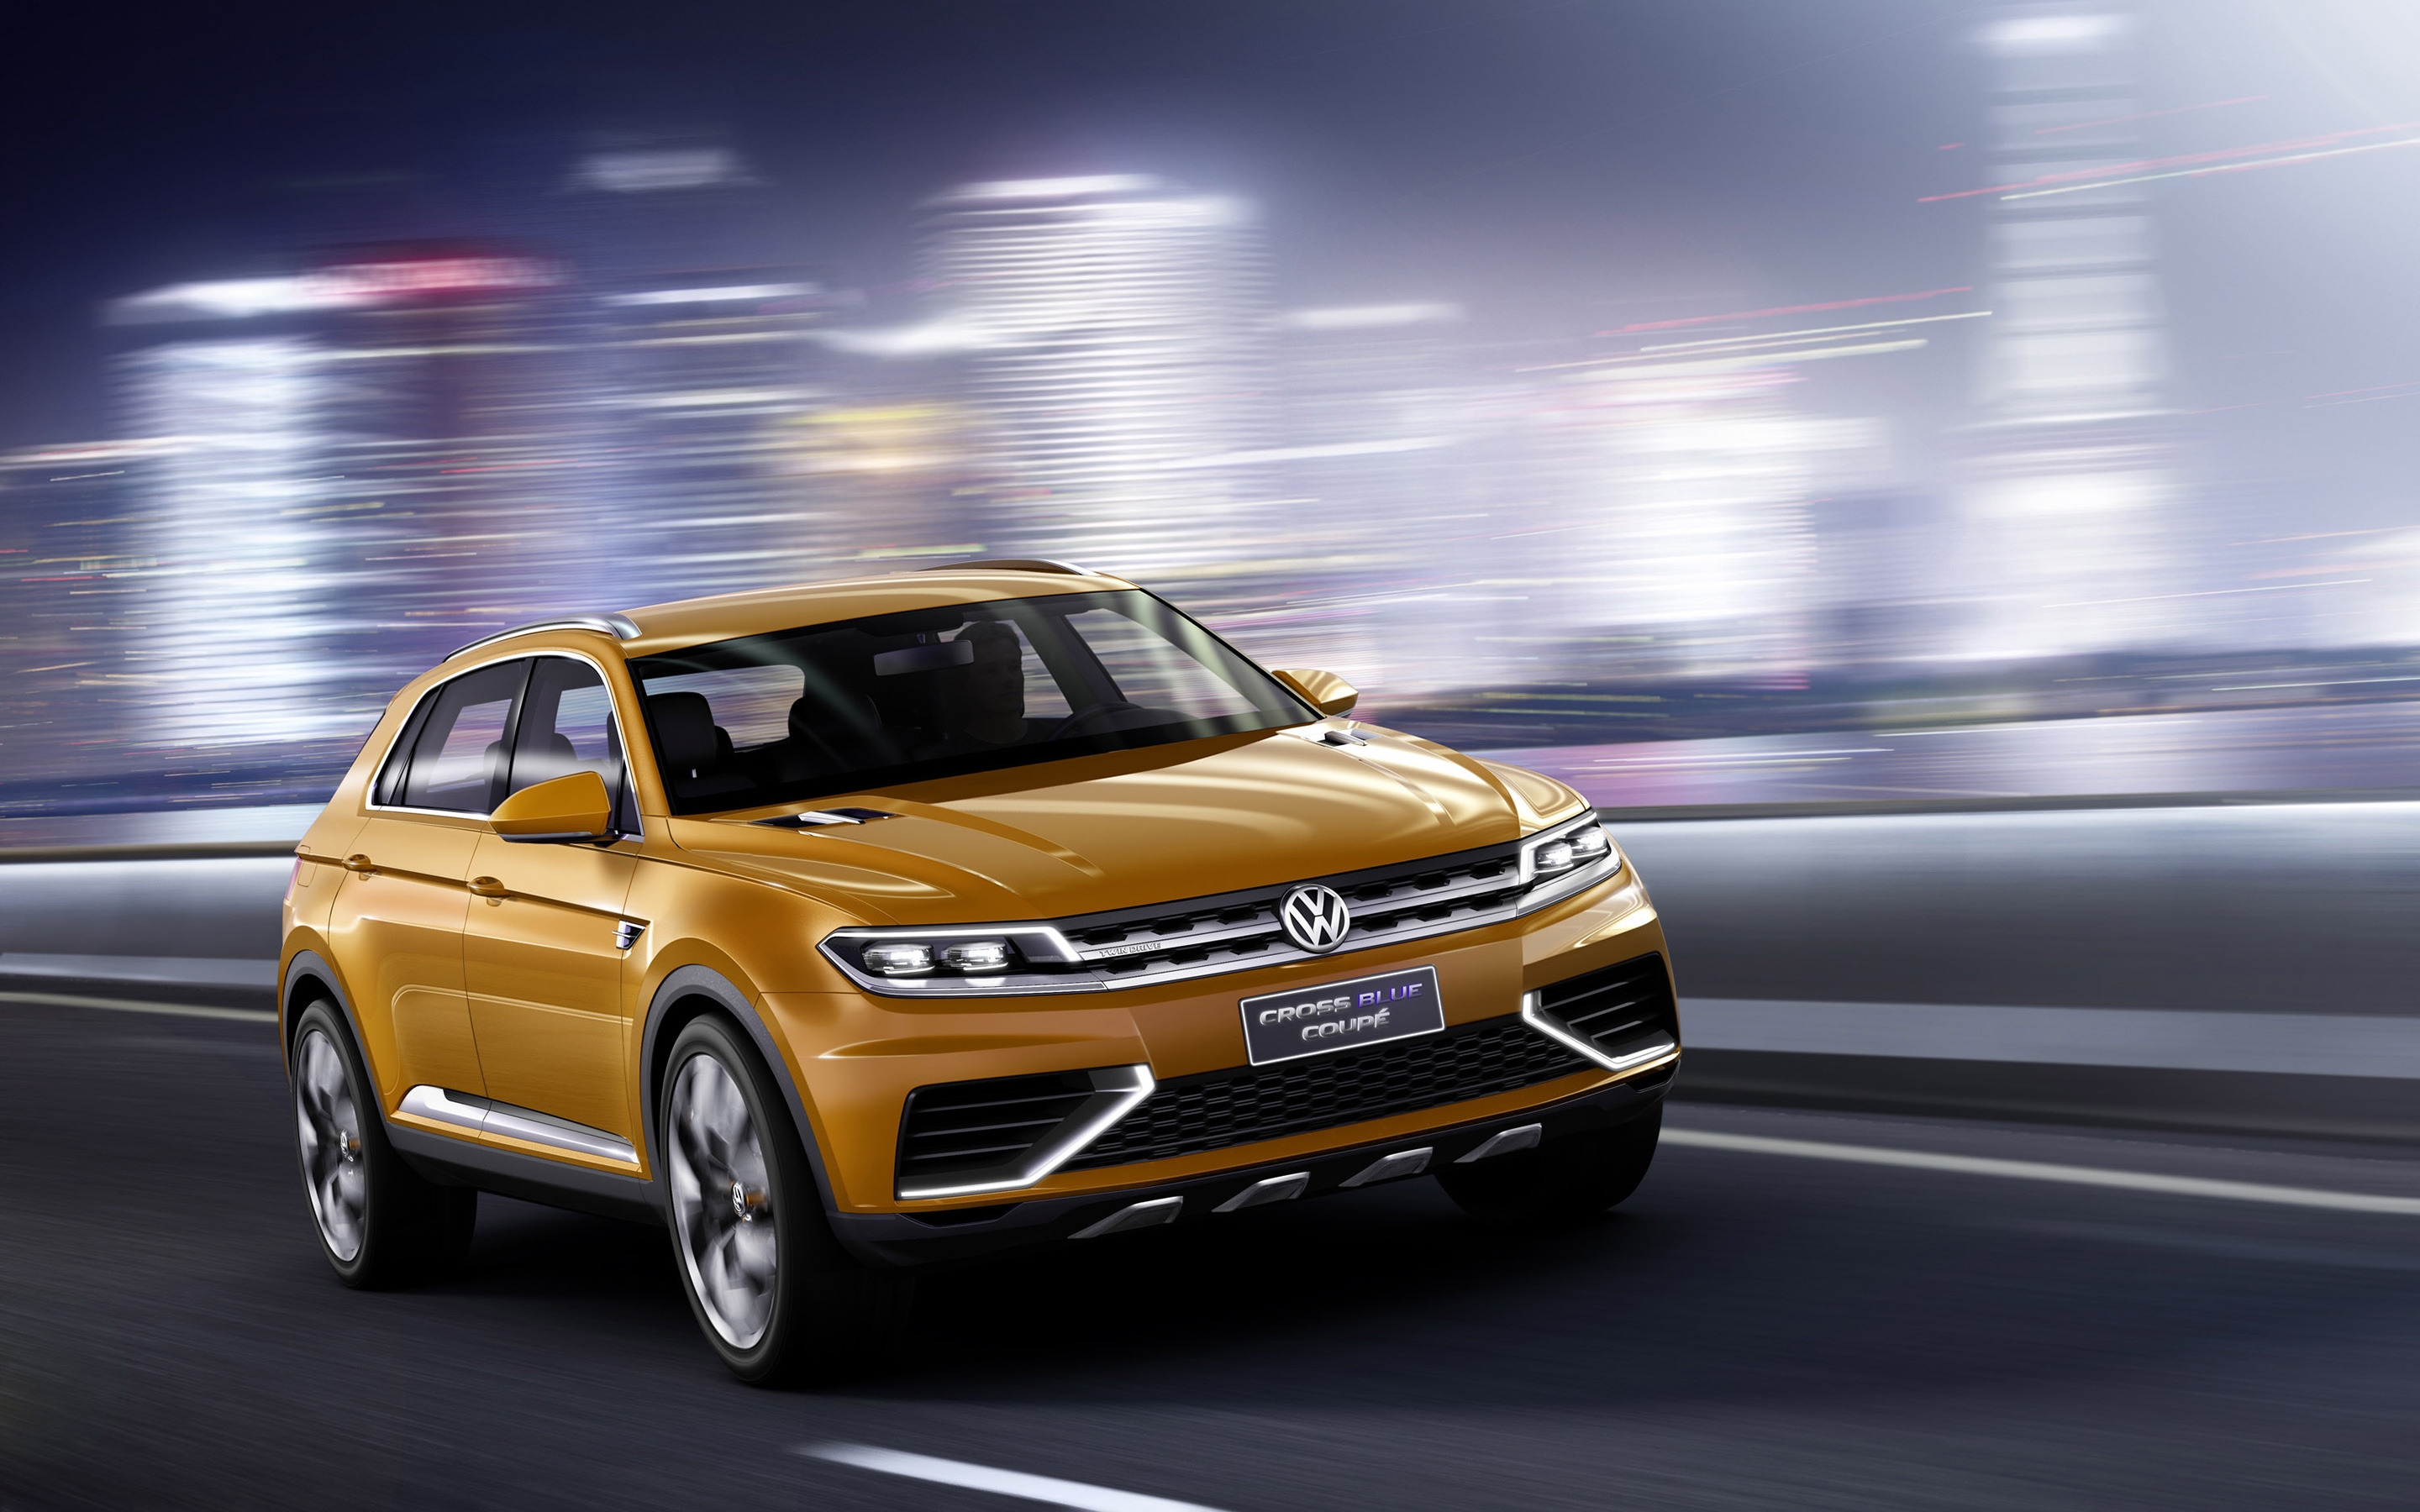 Volkswagen Crossblue Coupe Concept for 2880 x 1800 Retina Display resolution